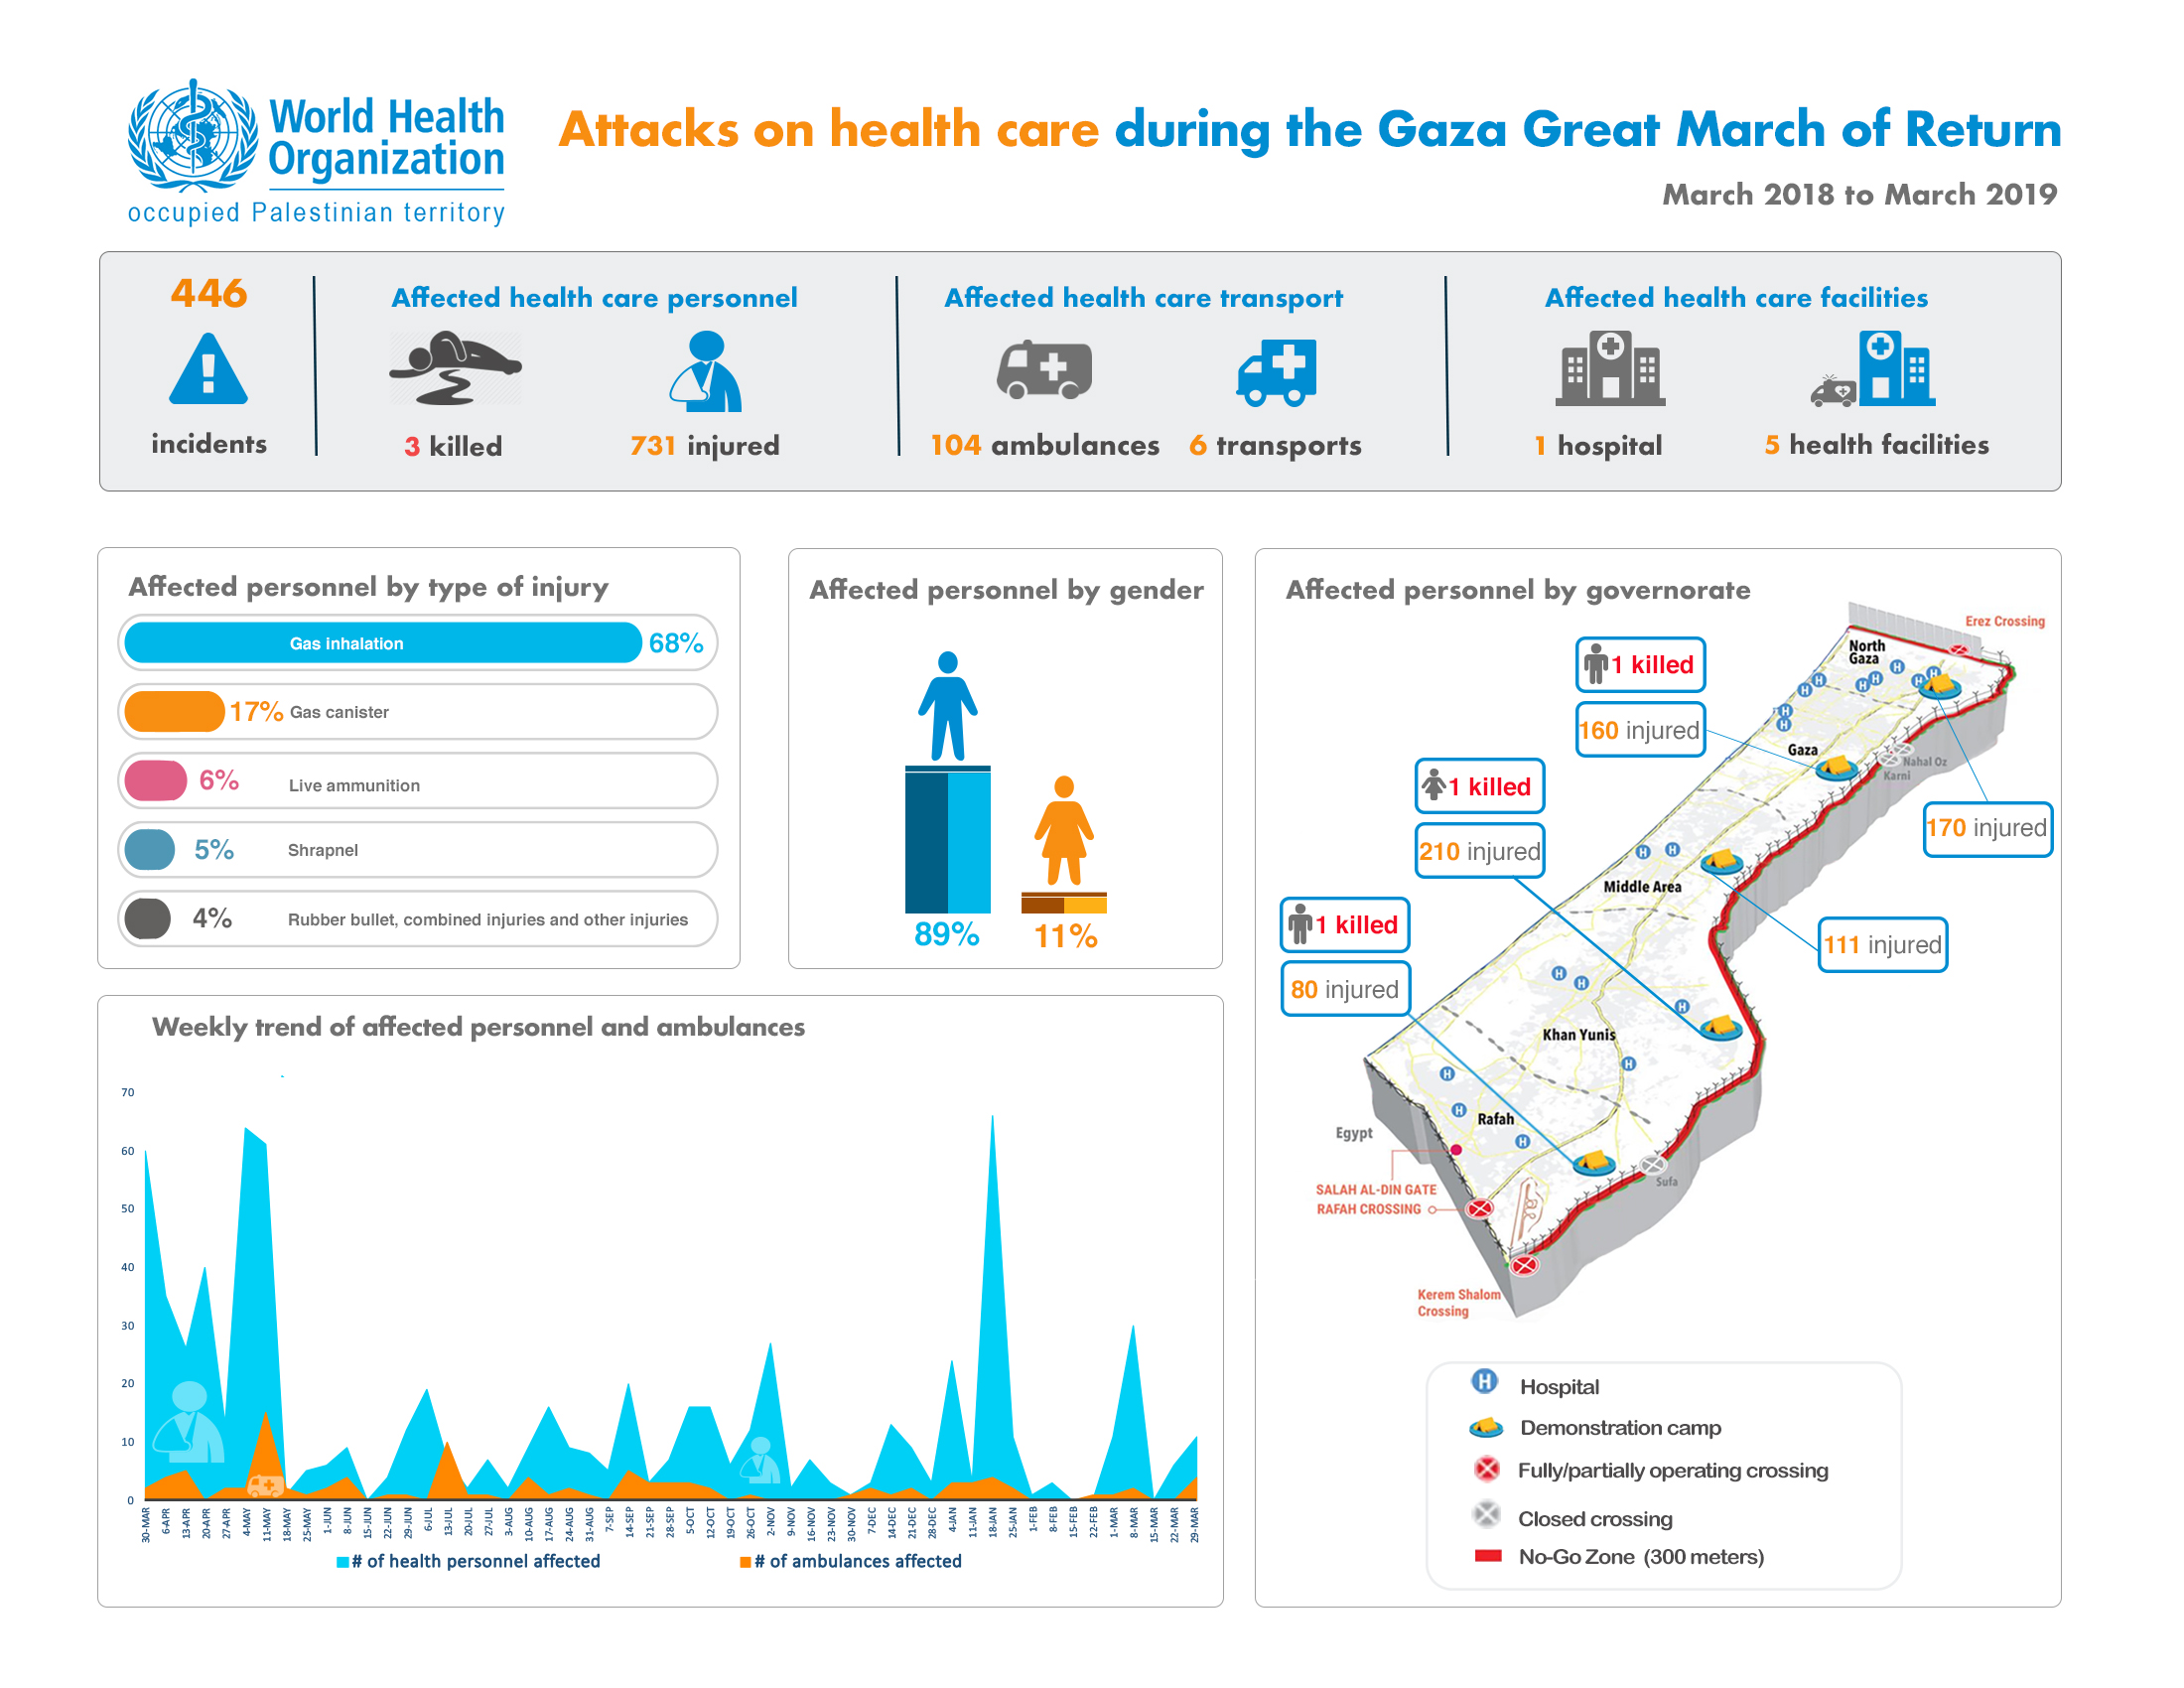 Attacks on health care during the Great March of Return in Gaza